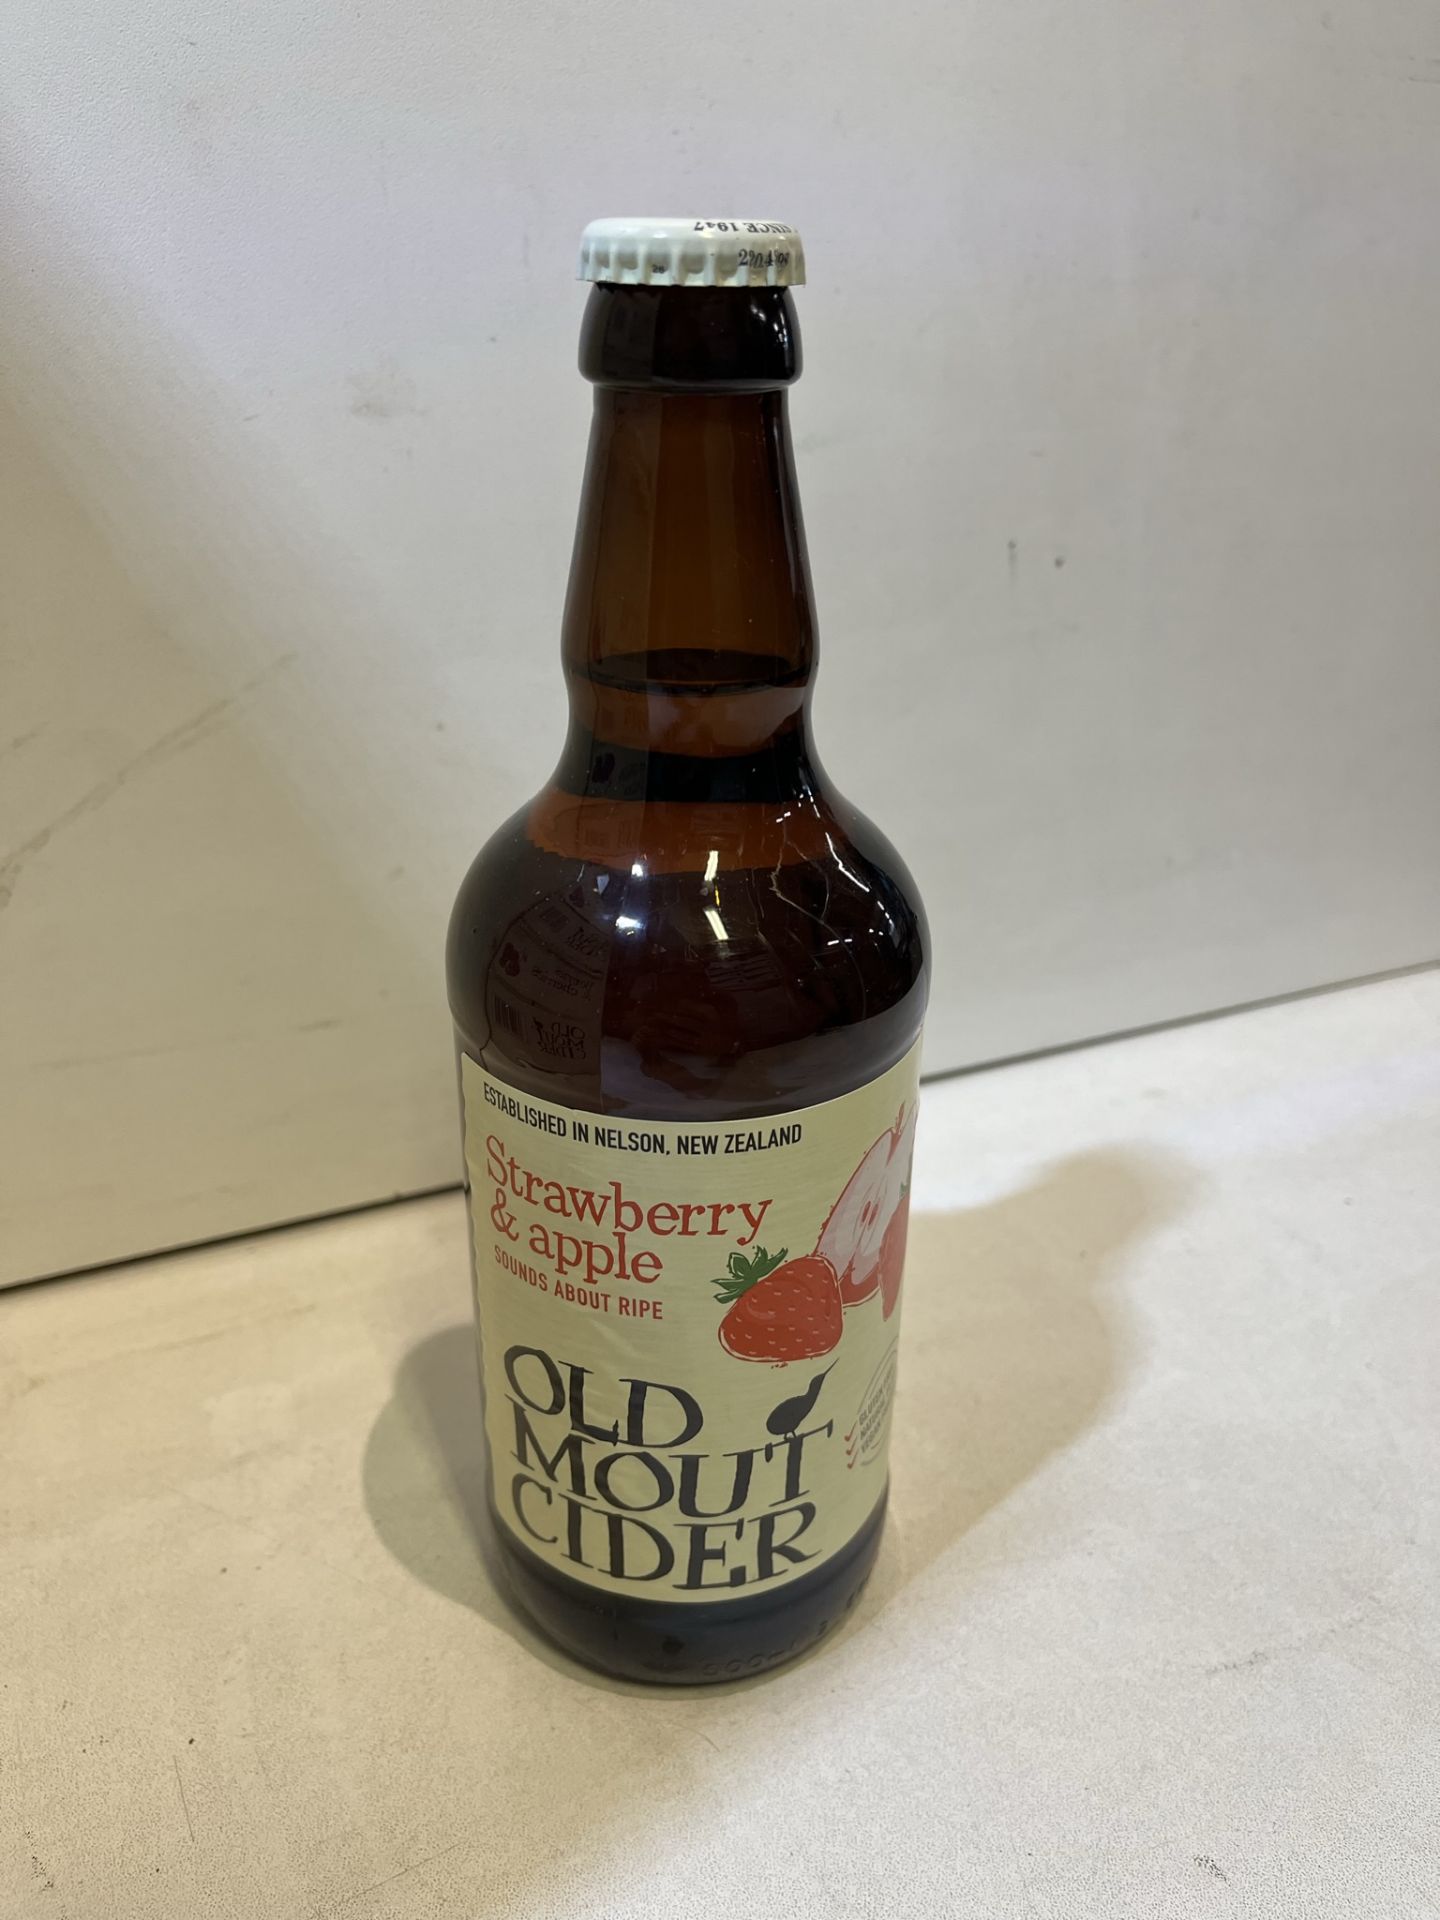 24 x 500ML Bottles Of Berries And Cherries Old Mount Cider - Image 2 of 4